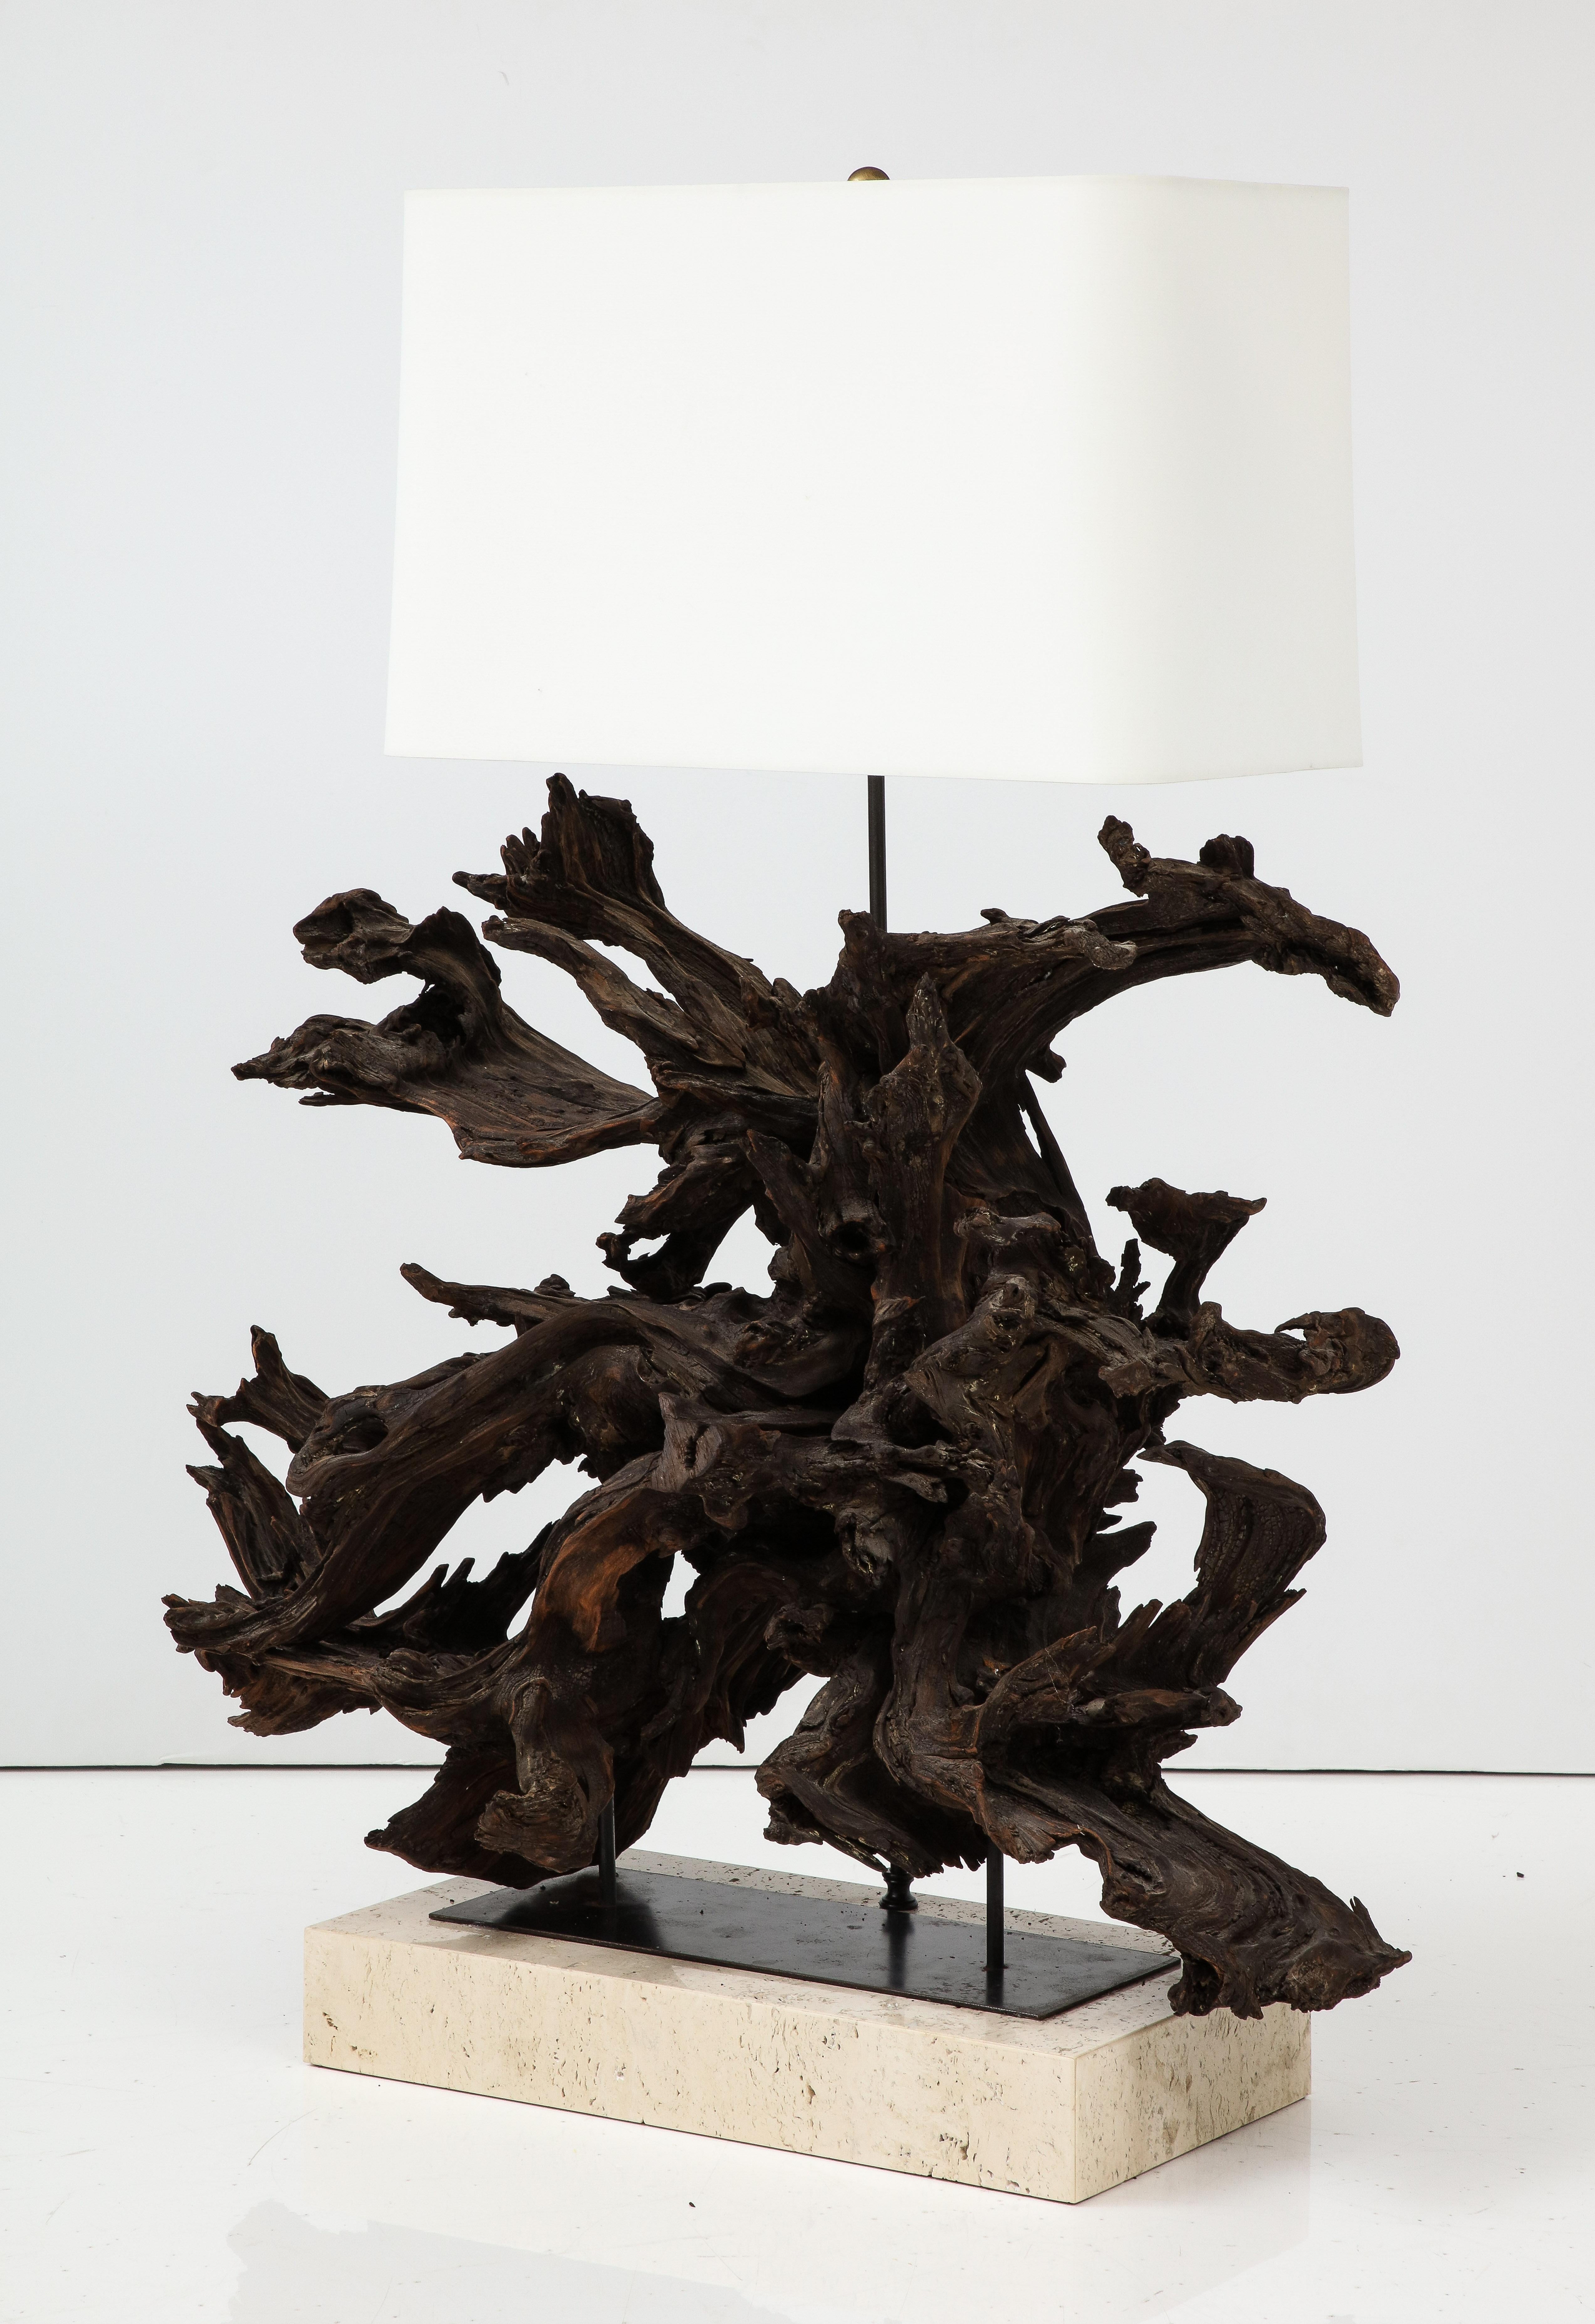 Large sculptural driftwood lamp on a travertine base.
The lamp has been Newly rewired with silk rayon cord and adjustable 
Antique brass double cluster that take standard size light bulbs.